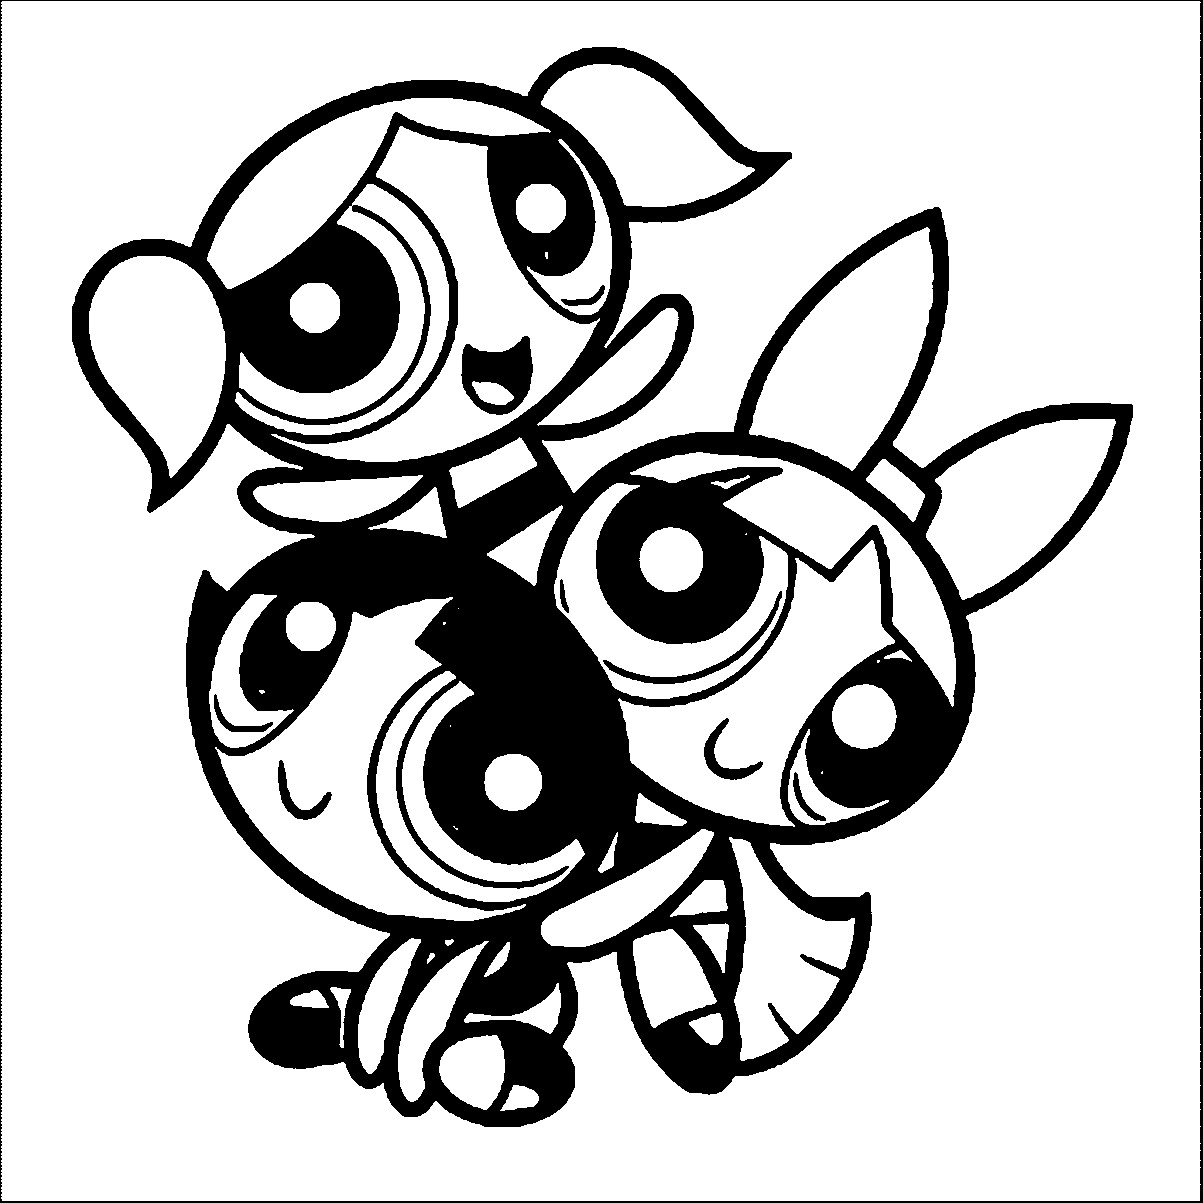 Power Puff Girls Coloring Book
 Powerpuff Girls Coloring Pages